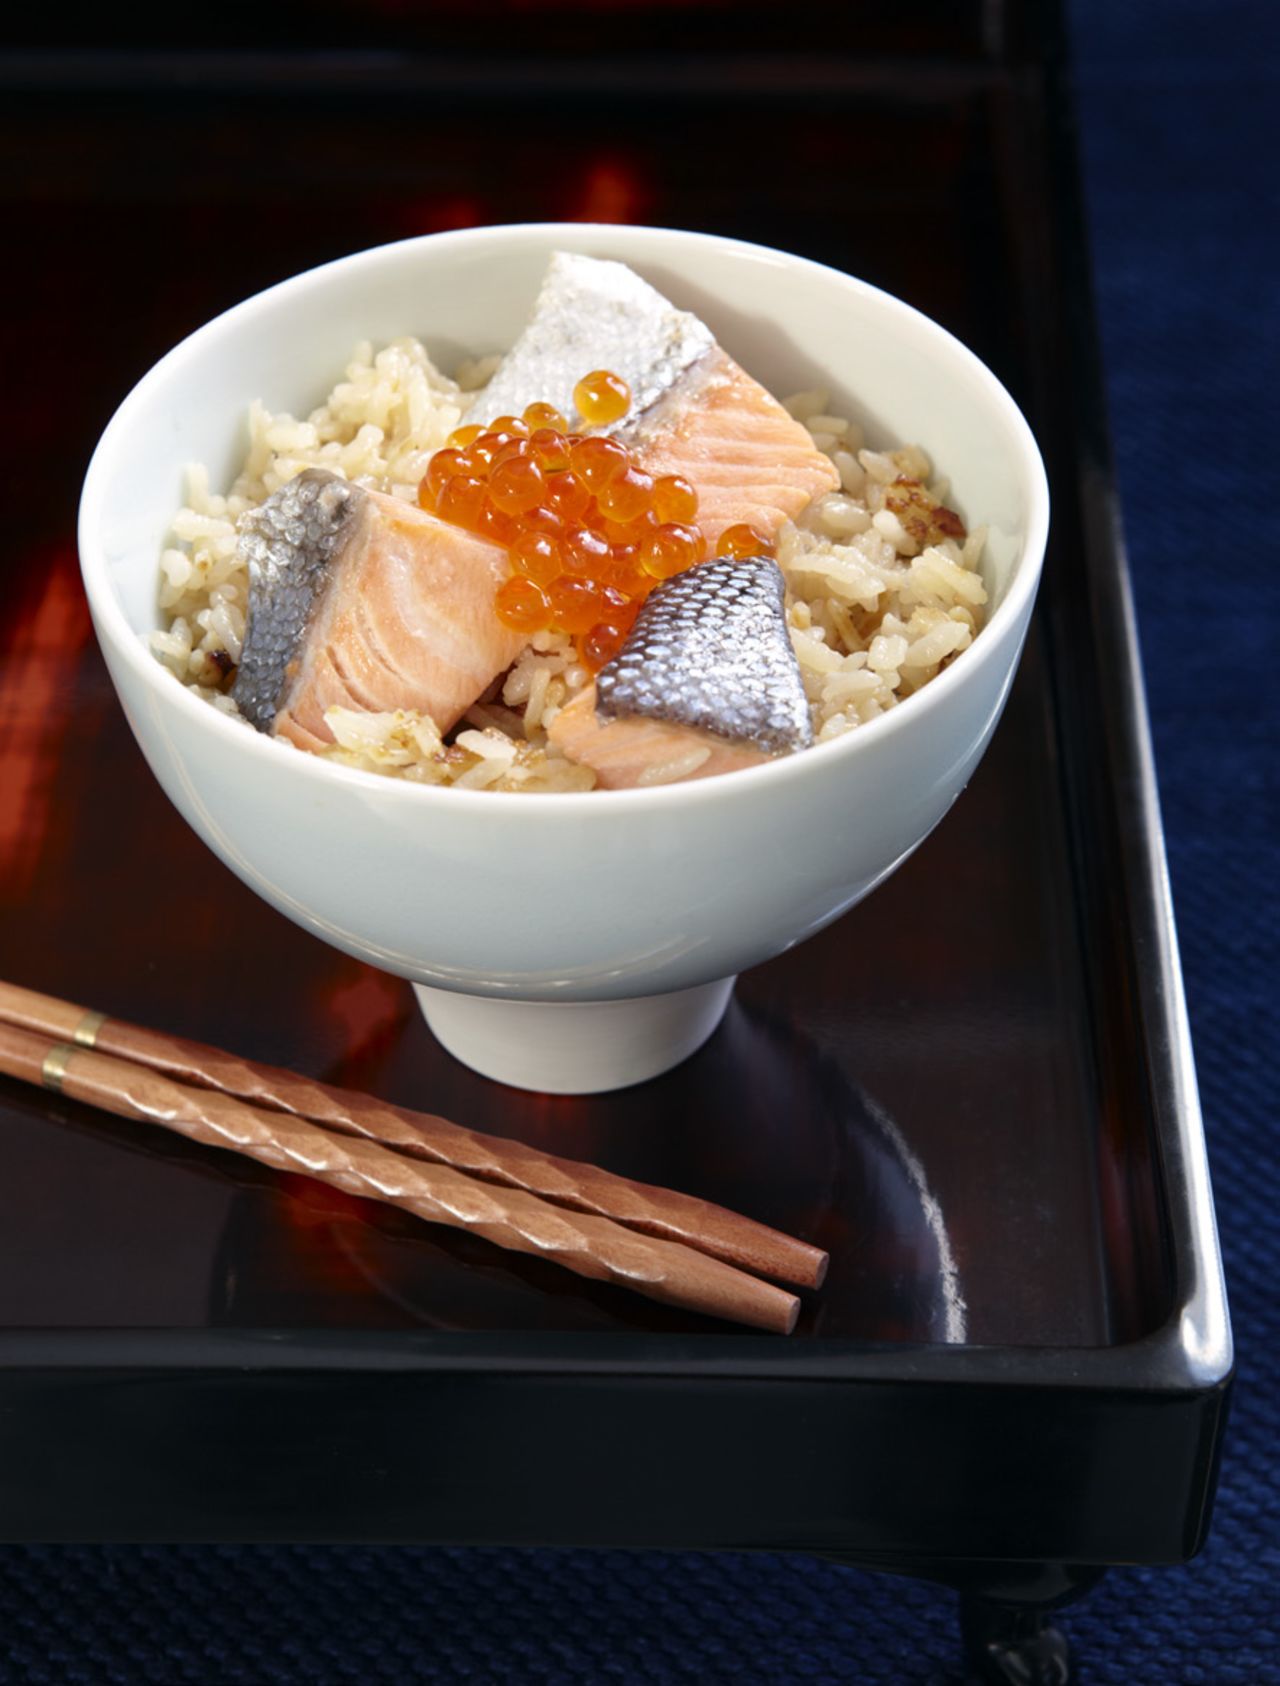 Salmon has always played an important role in Tohoku cuisine and harako meshi (literally "salmon child rice") is a "signature dish" of the region. Often featured at family gatherings, every household seems to have its own rendition. 